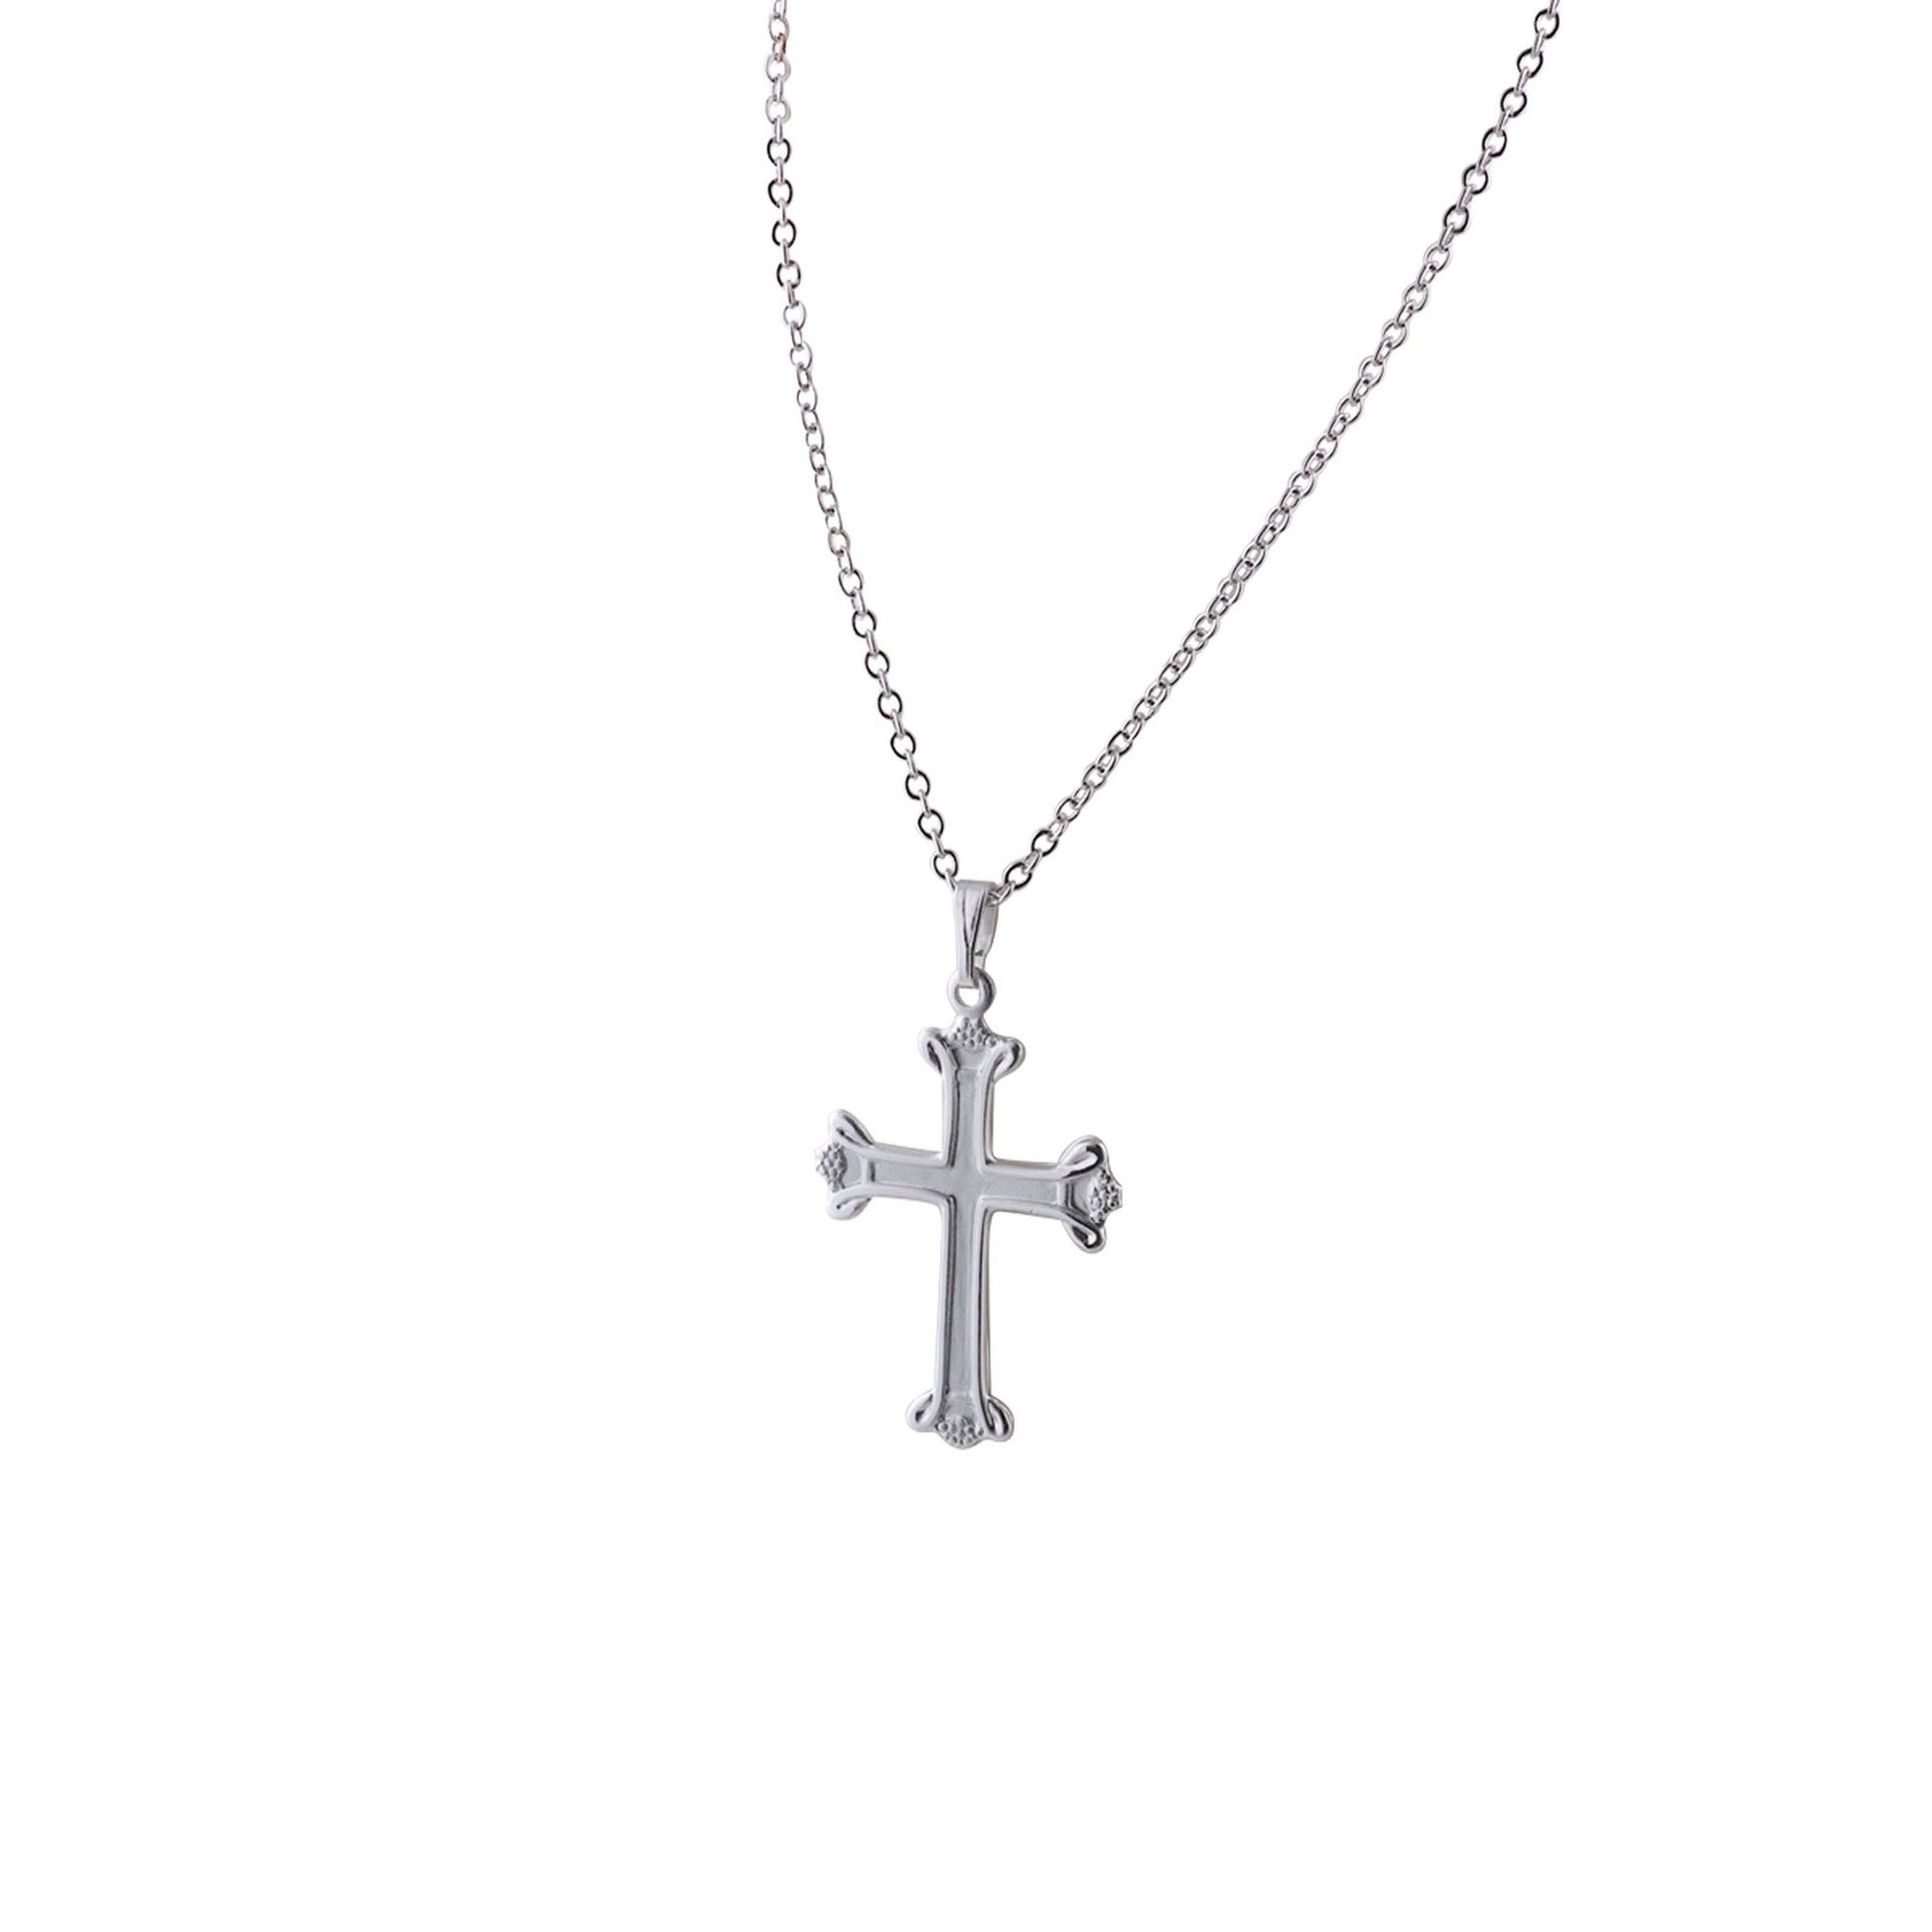 A cross with polished edge displayed on a neutral white background.